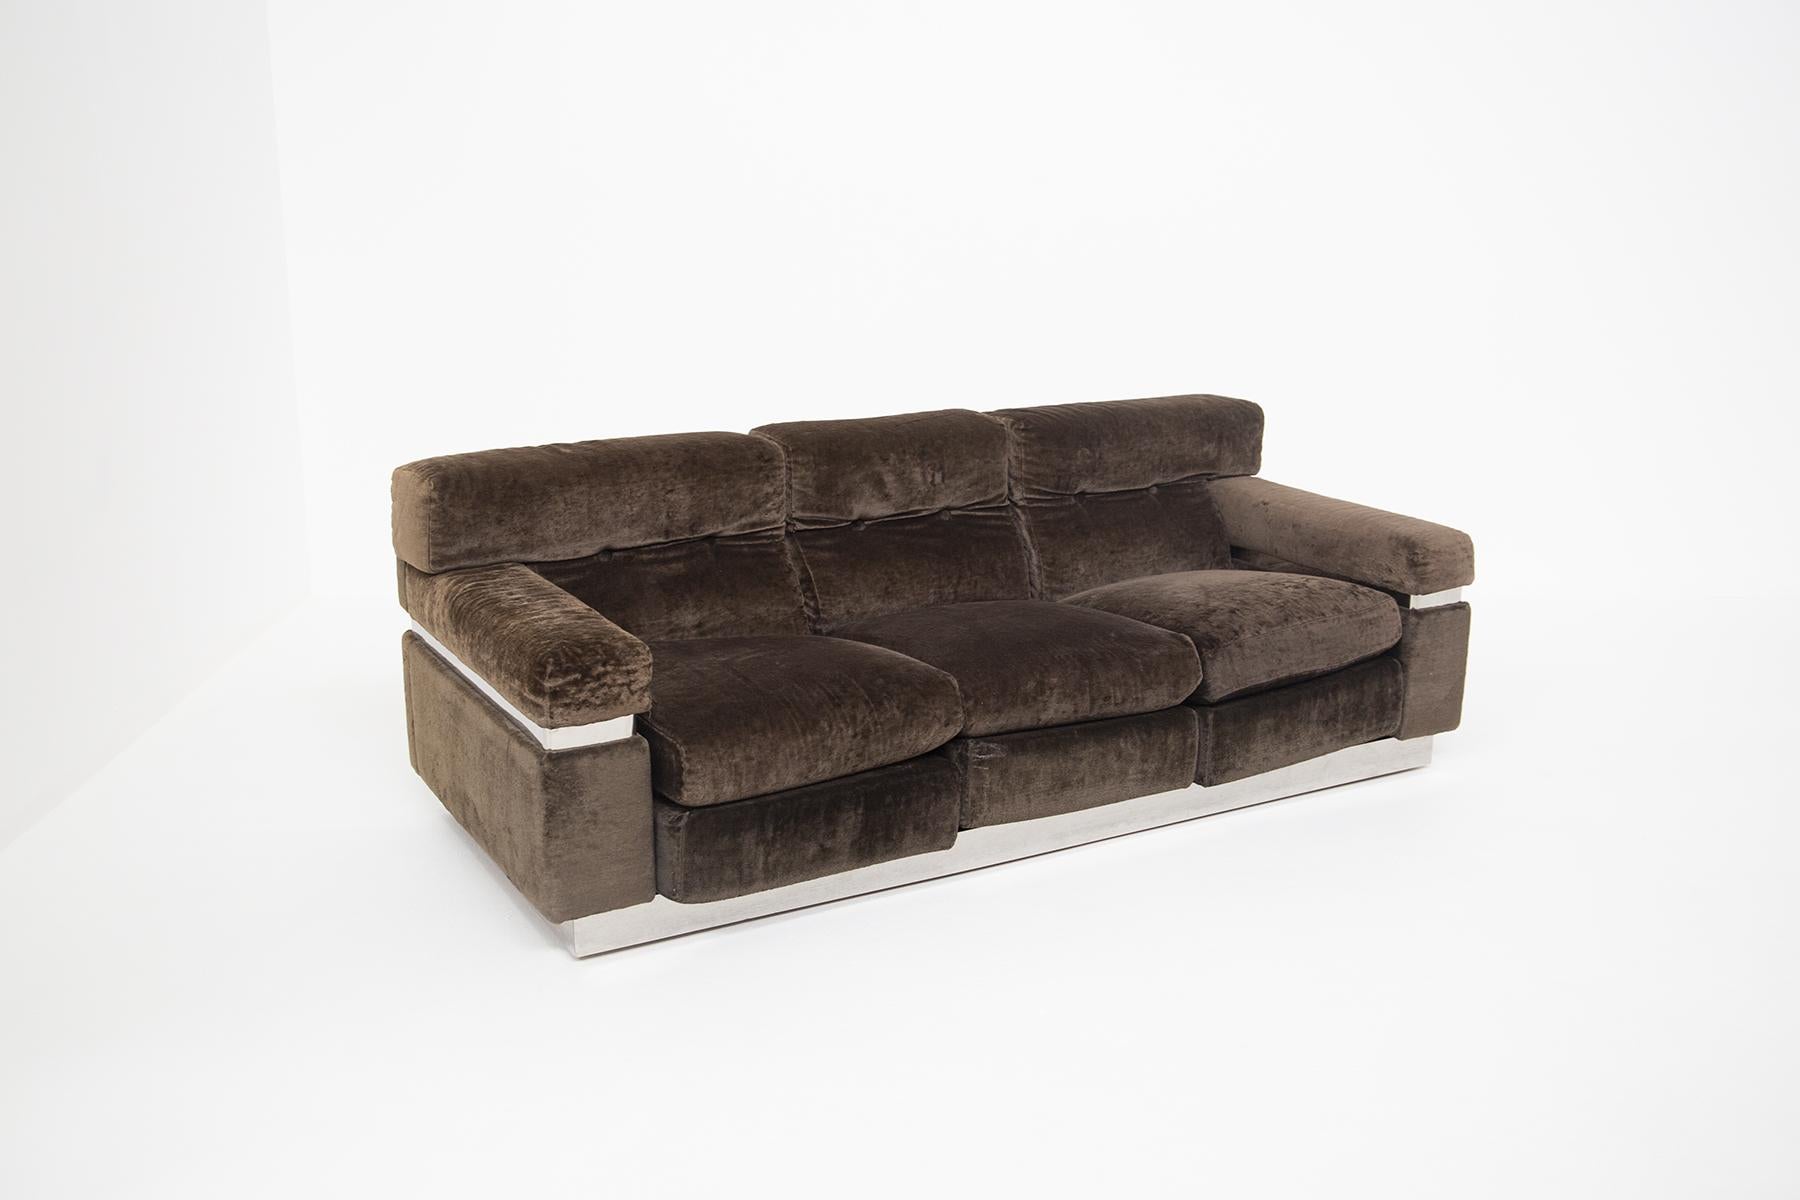 Three seater sofa designed by Vittorio Introini in the 70s. The sofa is made of brown velvet with clean and linear geometric shapes. The sofa has a peculiarity, at the center of the sofa throughout its perimeter has been applied a rectangular steel